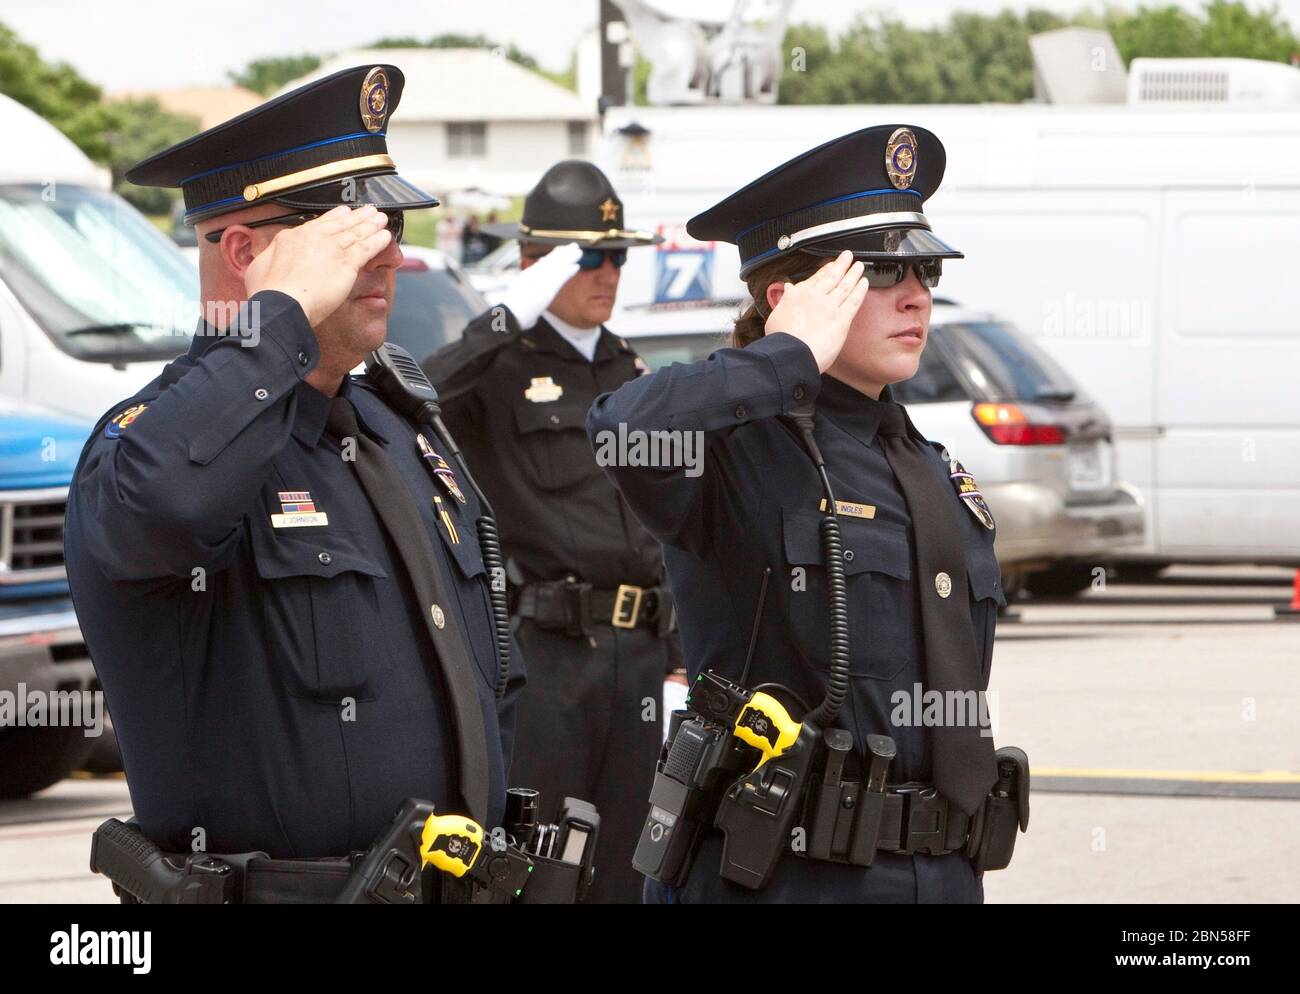 Austin Texas USA, April 11 2012: Uniformed police officers pay tribune at funeral of Austin Police Department officer Jaime Padron, who was killed in the line of duty.  ©Marjorie Kamys Cotera/Daemmrich Photography Stock Photo